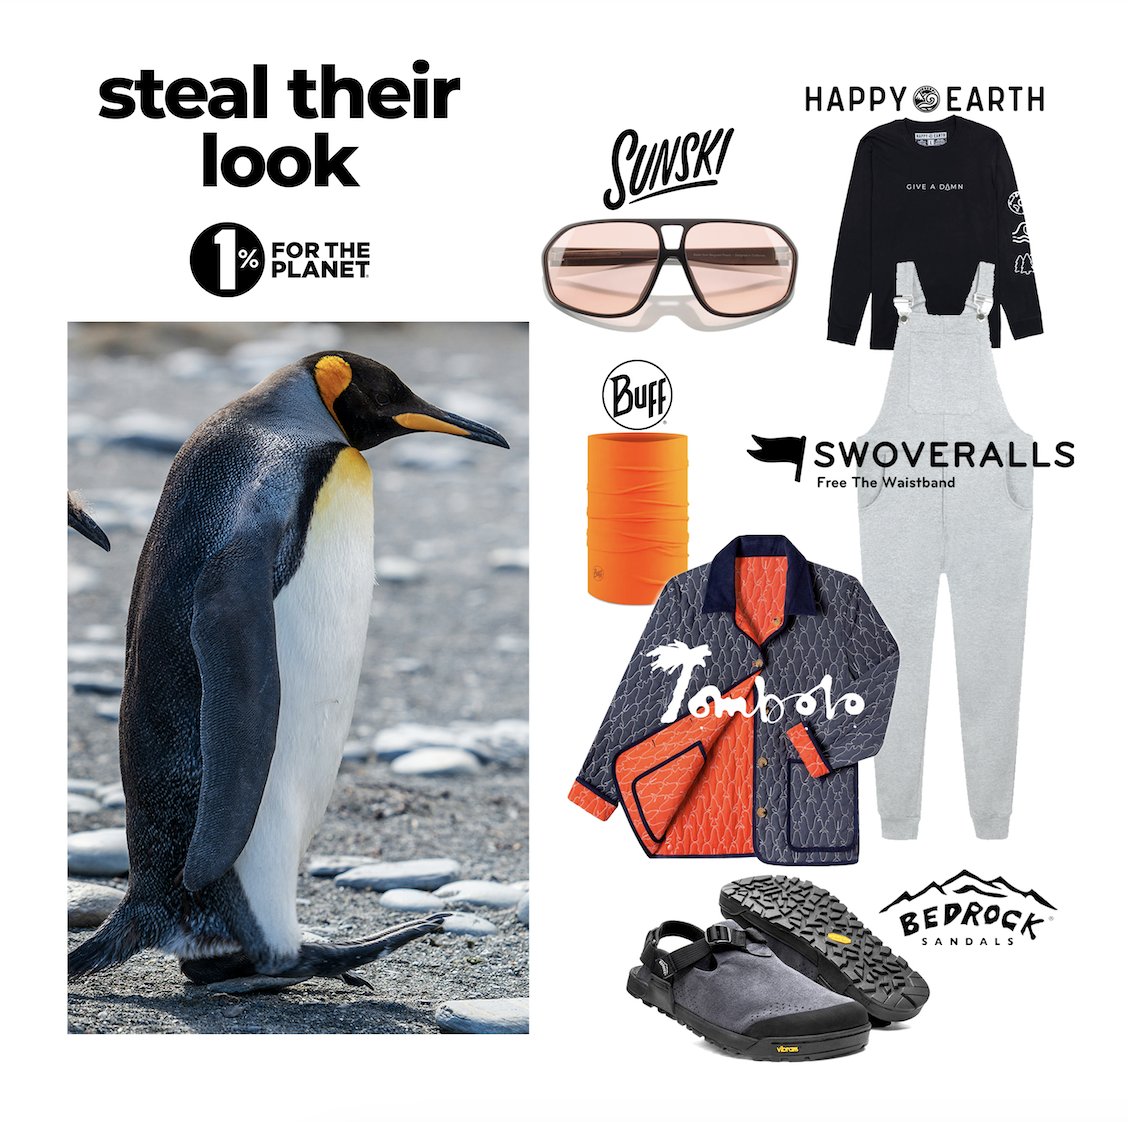 A vibe fit for an emperor 🐧 Proof that it's possible to look good while doing good, ft. @swoveralls, @BedrockSandals, Tombolo, Sunski, Happy Earth and Buff #lookoftheday #onepercentfortheplanet #membership #certification #climateaction